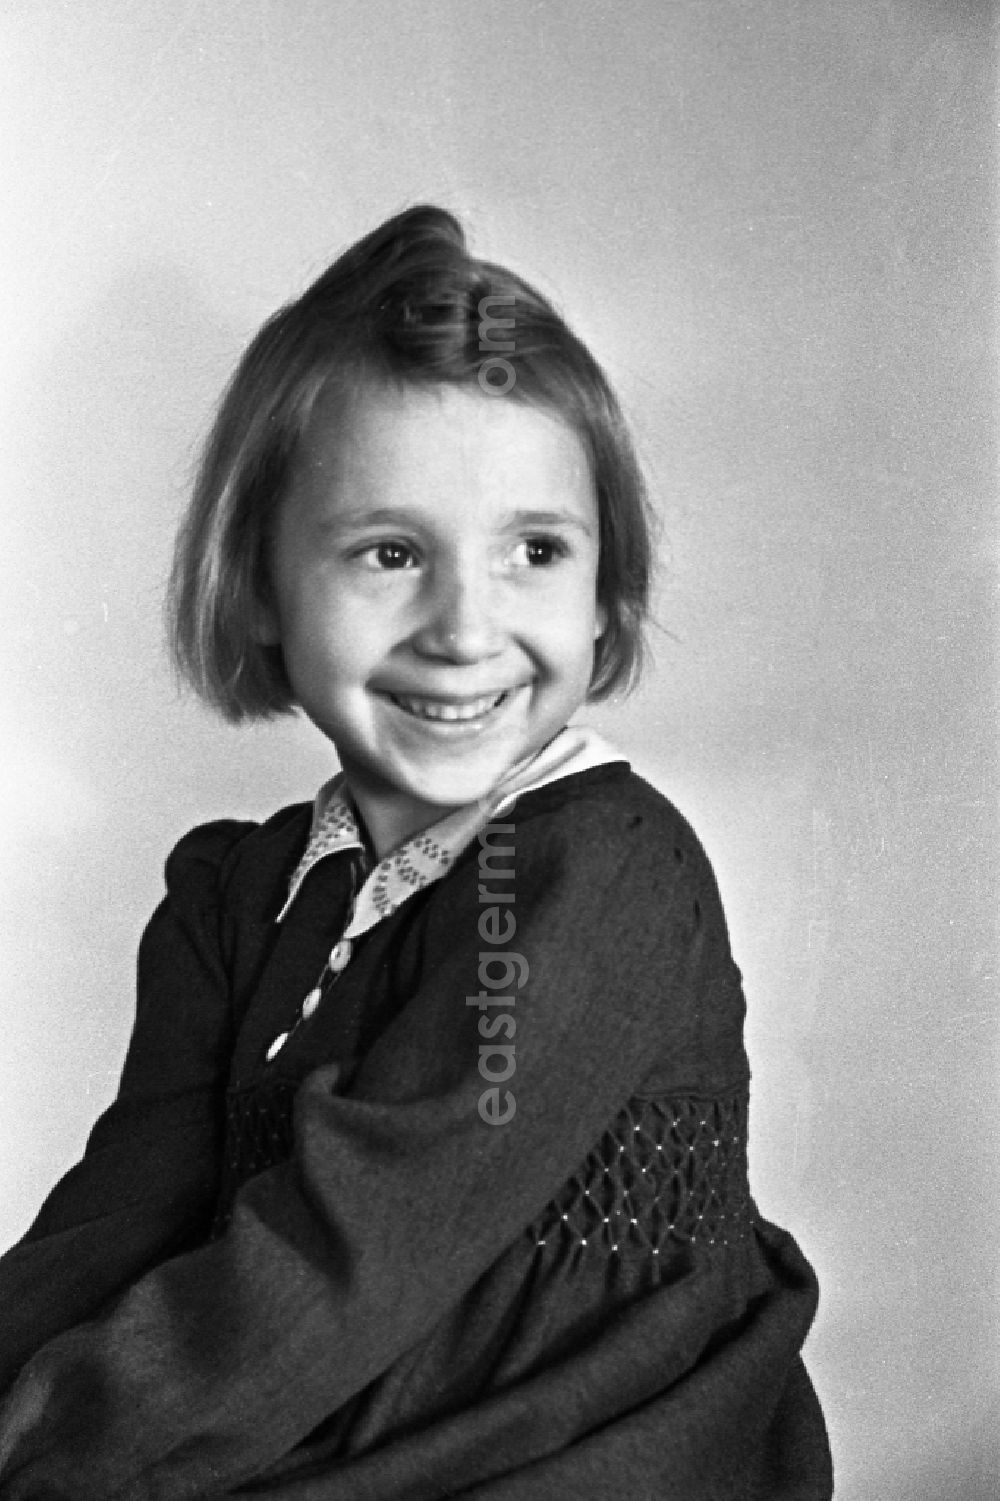 GDR image archive: Merseburg - Little girl in the portrait in Merseburg in the federal state Saxony-Anhalt in Germany